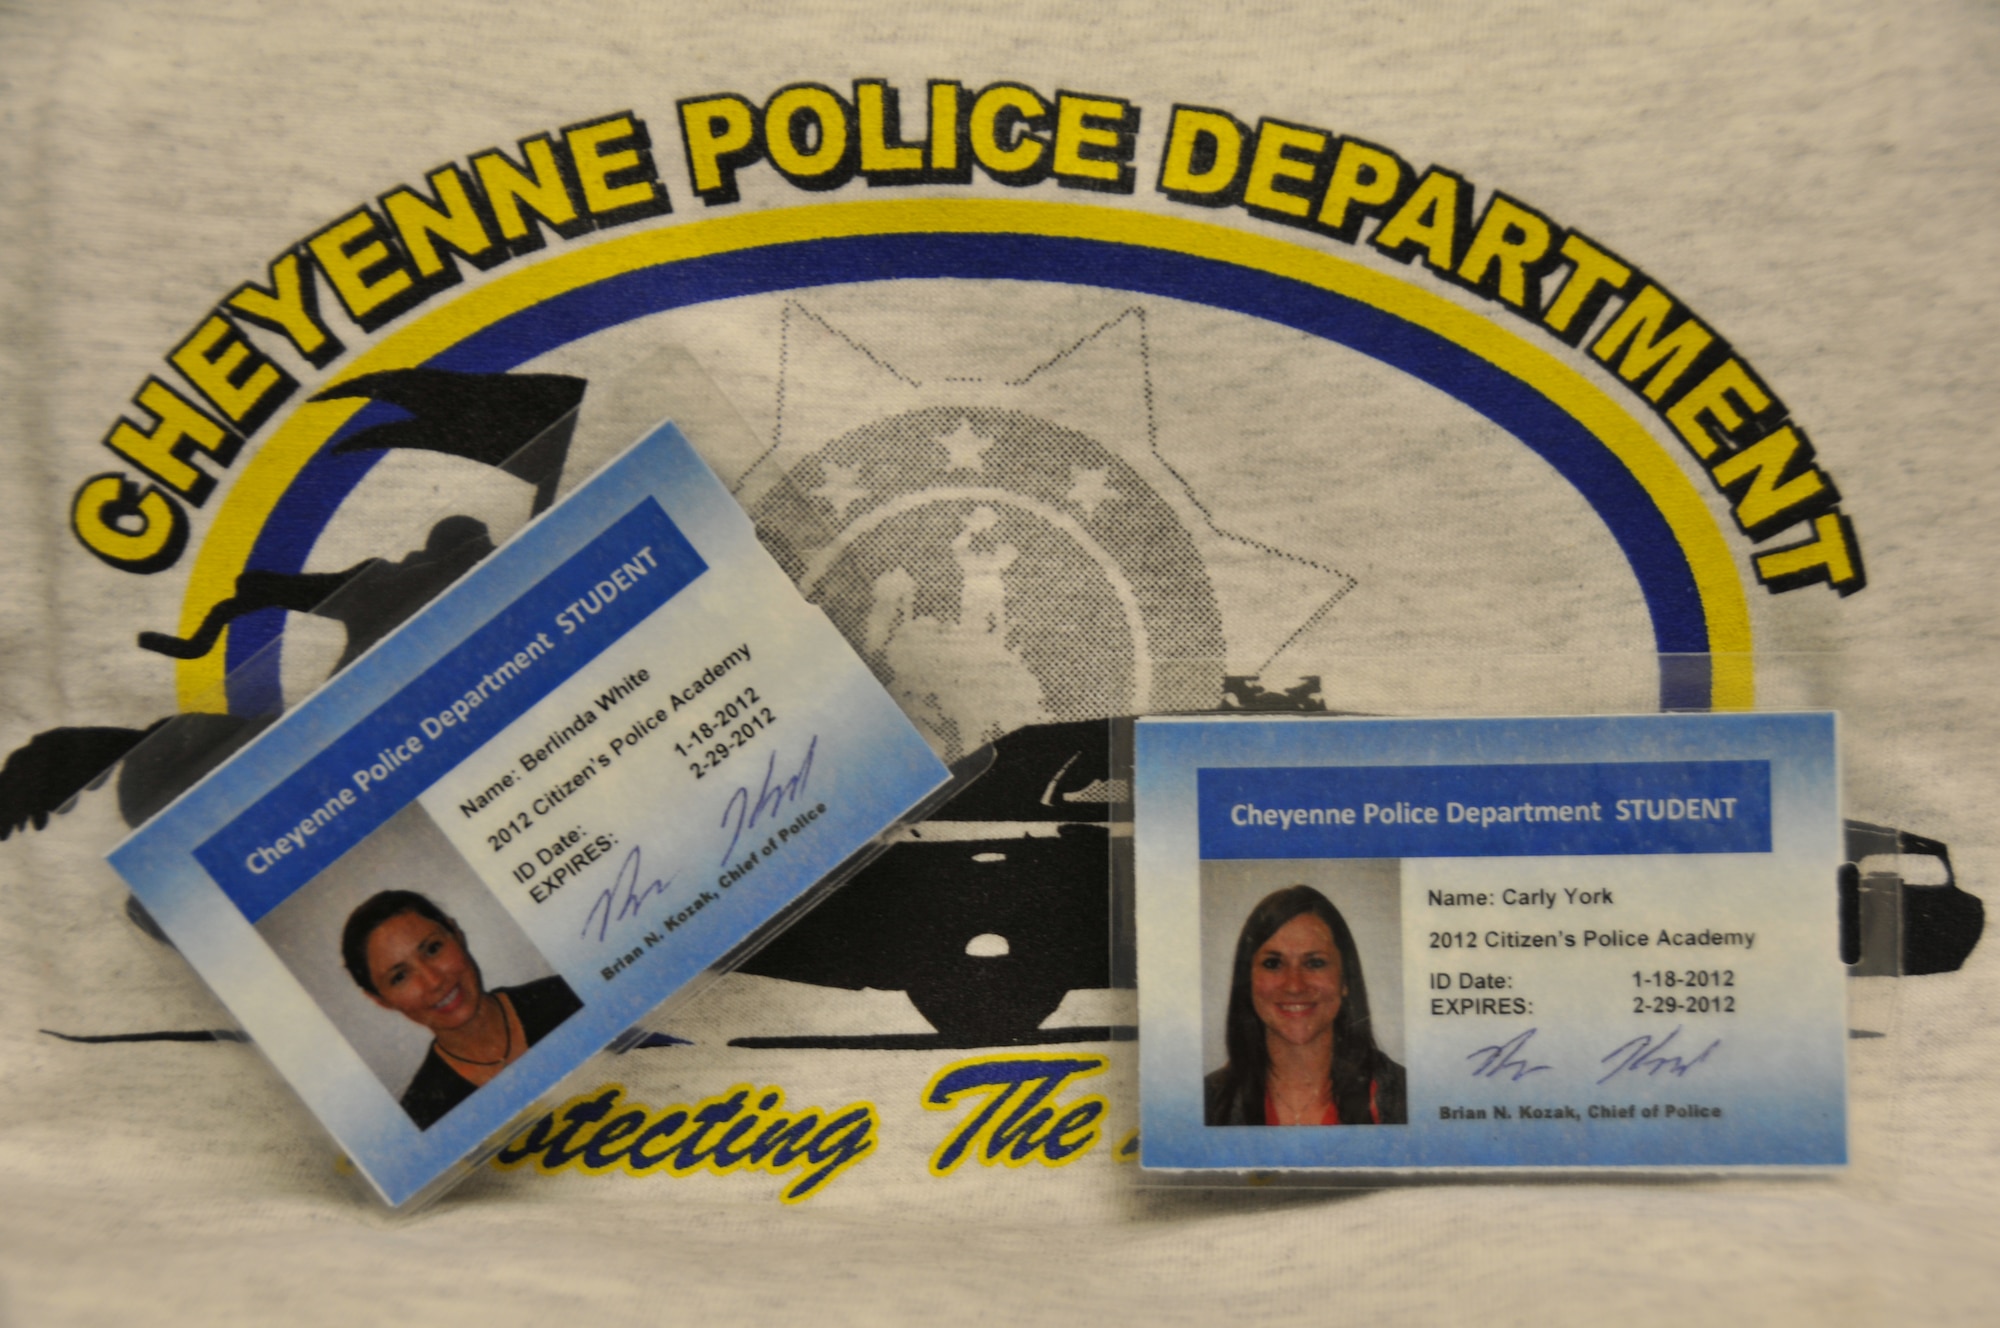 Crime scene processing, traffic enforcement, firearms familiarization, and building searches were just a few of the law enforcement duties 1st Lt. Berlinda White and 2nd Lt. Carly York were introduced to during their eight week attendance at the Citizen’s Police Academy. 